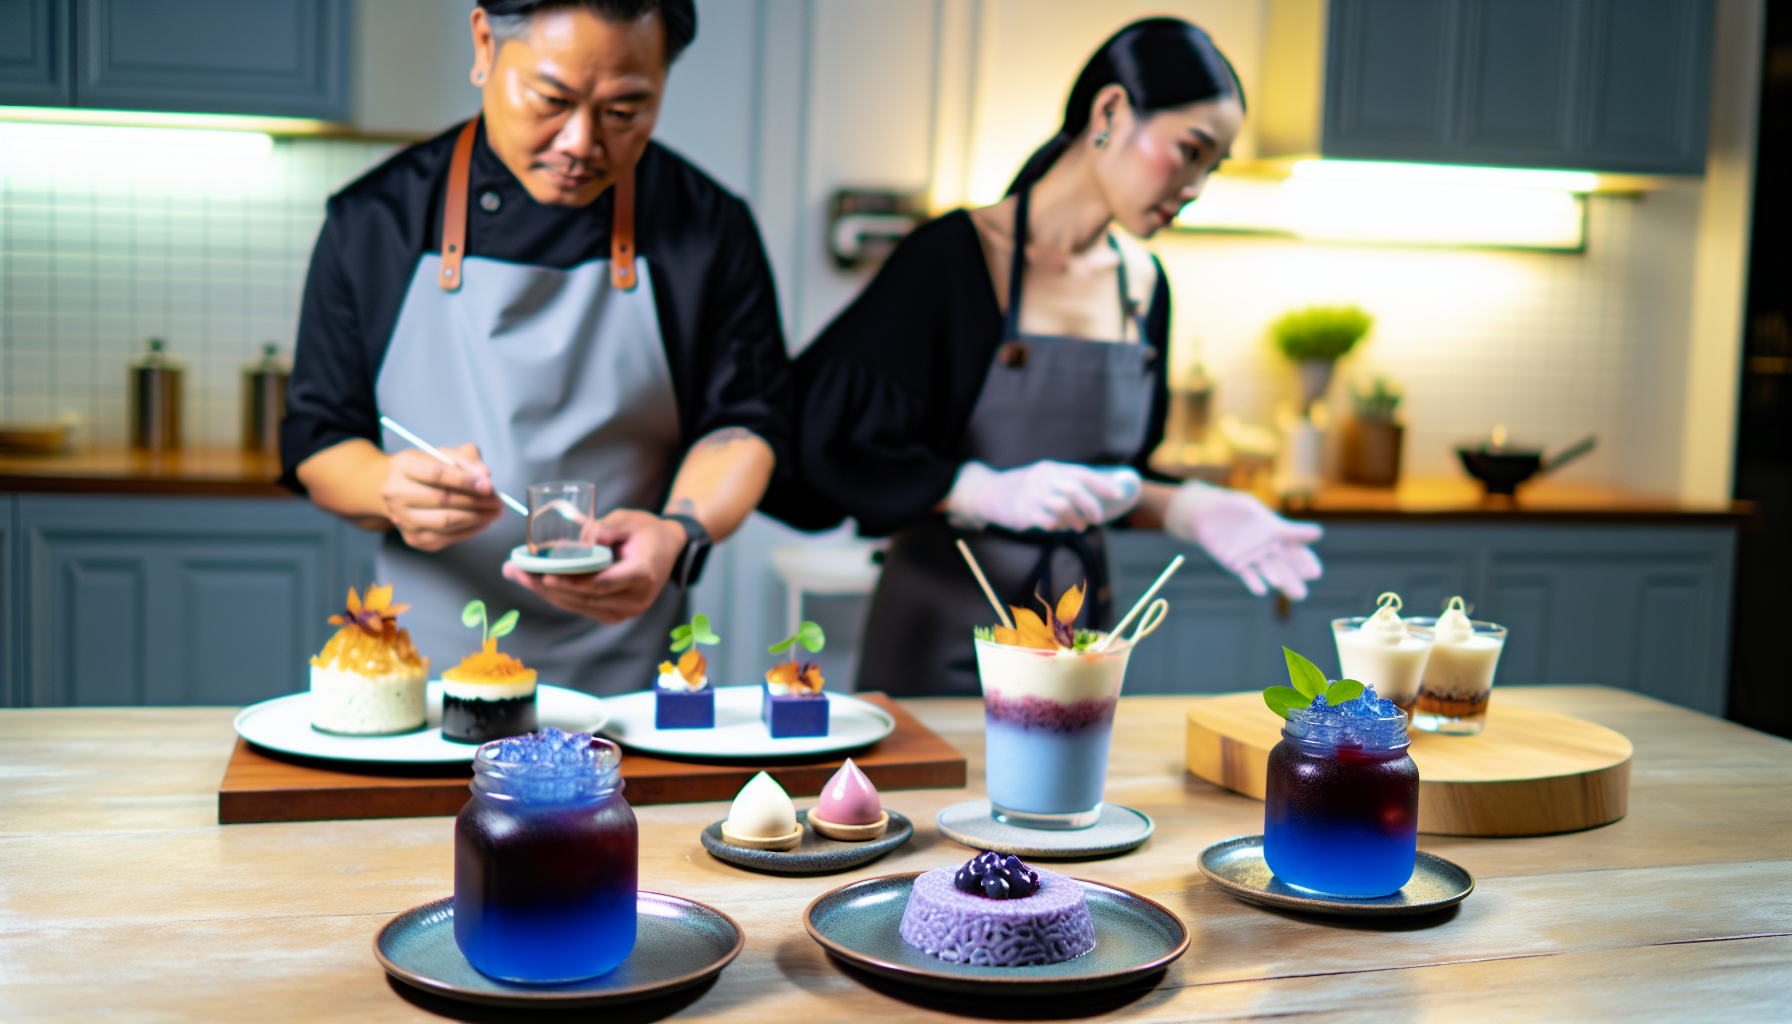 Culinary creations with butterfly pea flower extract